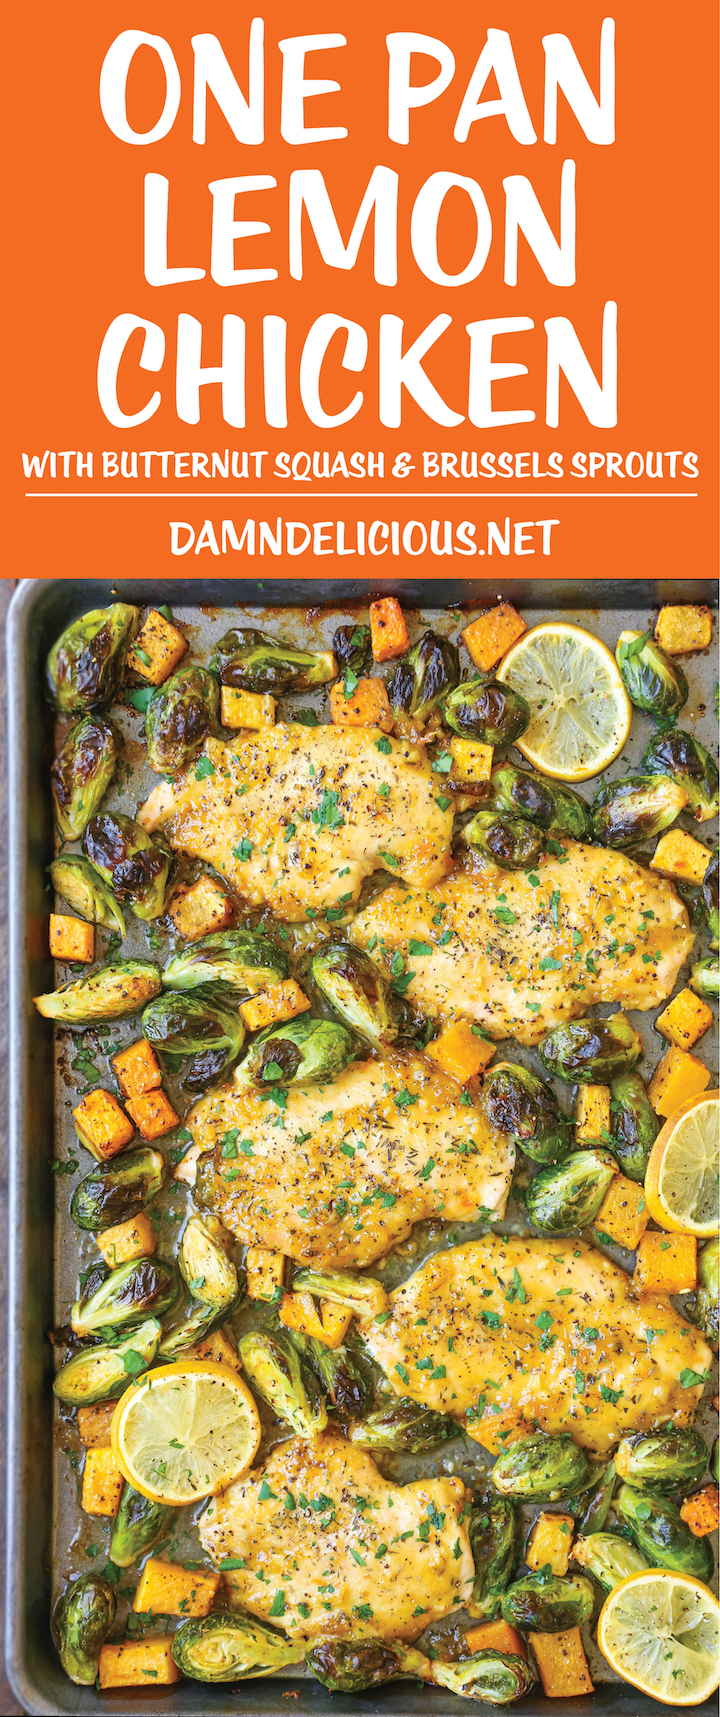 One Pan Lemon Chicken with Butternut Squash and Brussels Sprouts - An easy peasy one pan meal! And the chicken breasts come out so tender and flavorful!